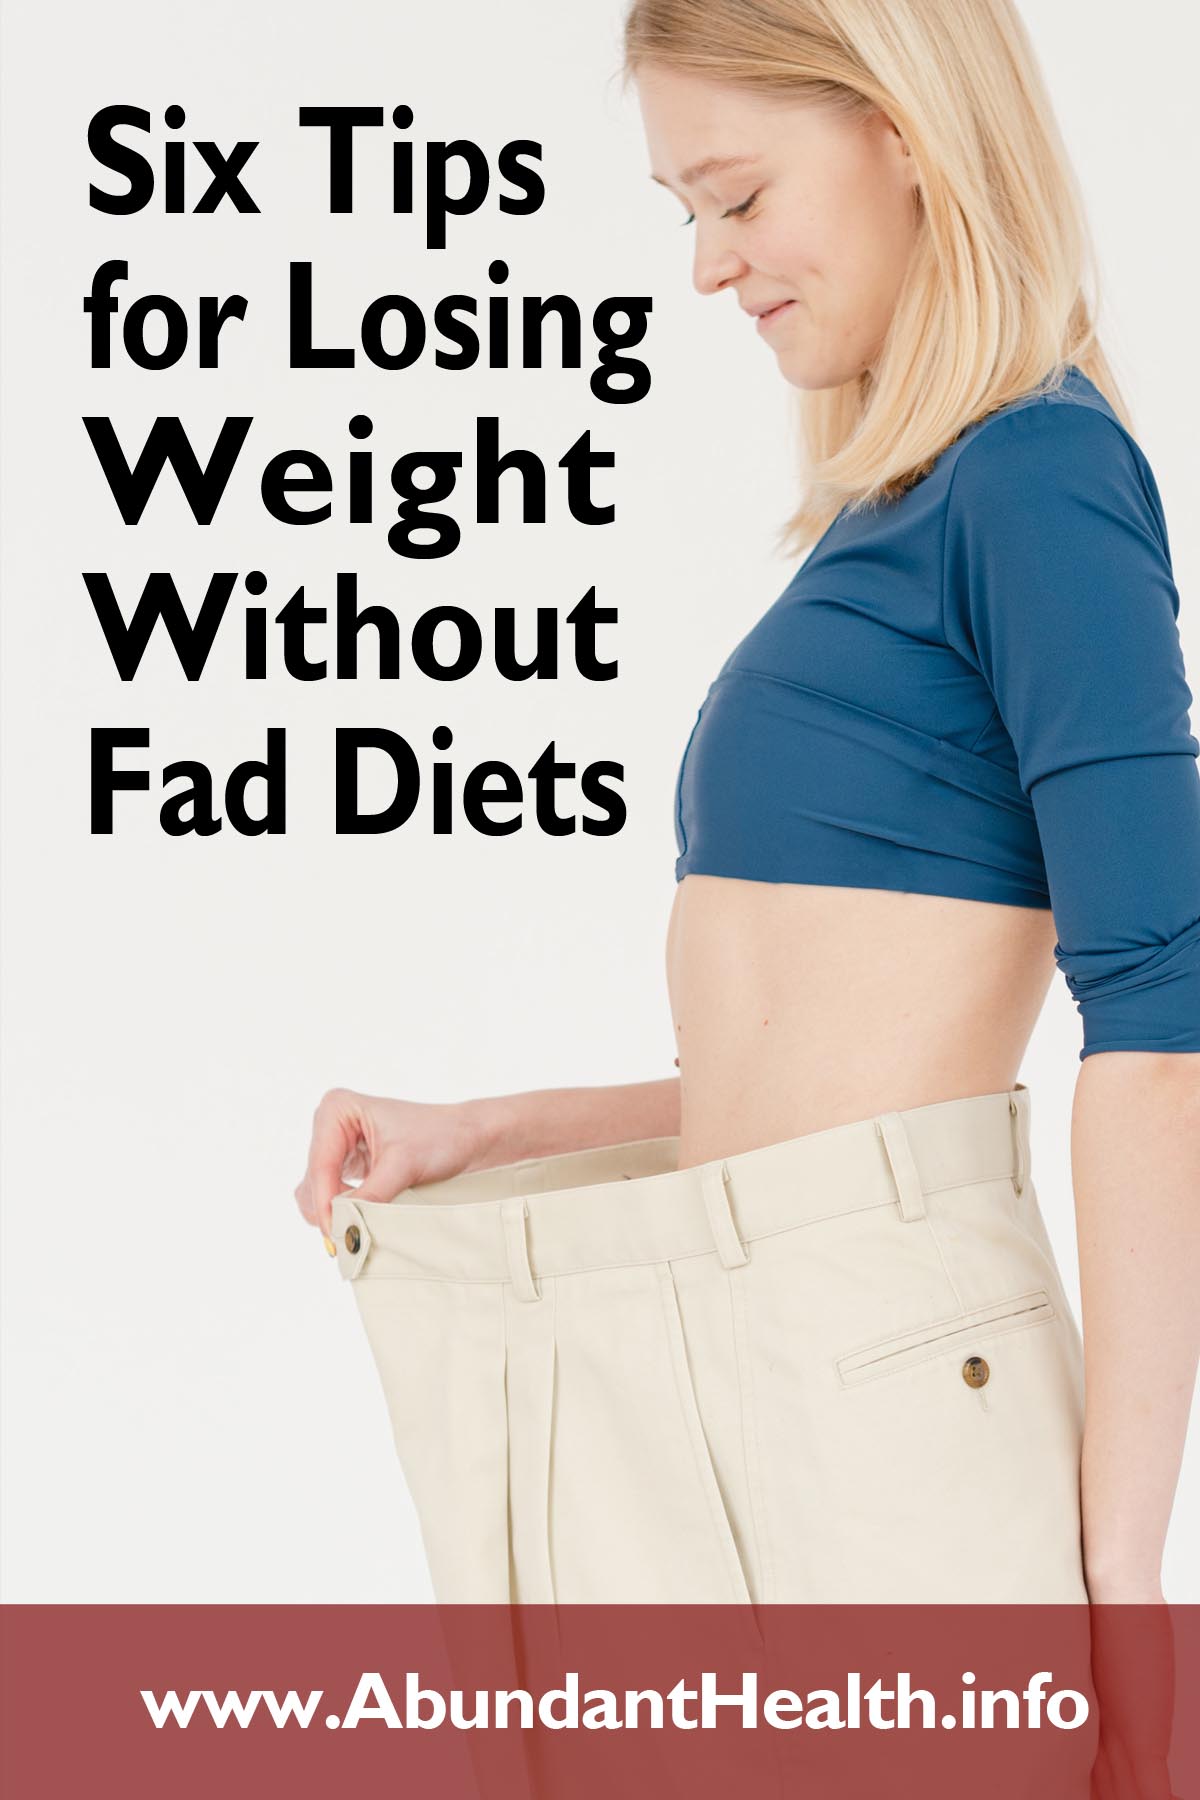 Six Tips for Losing Weight Without Fad Diets